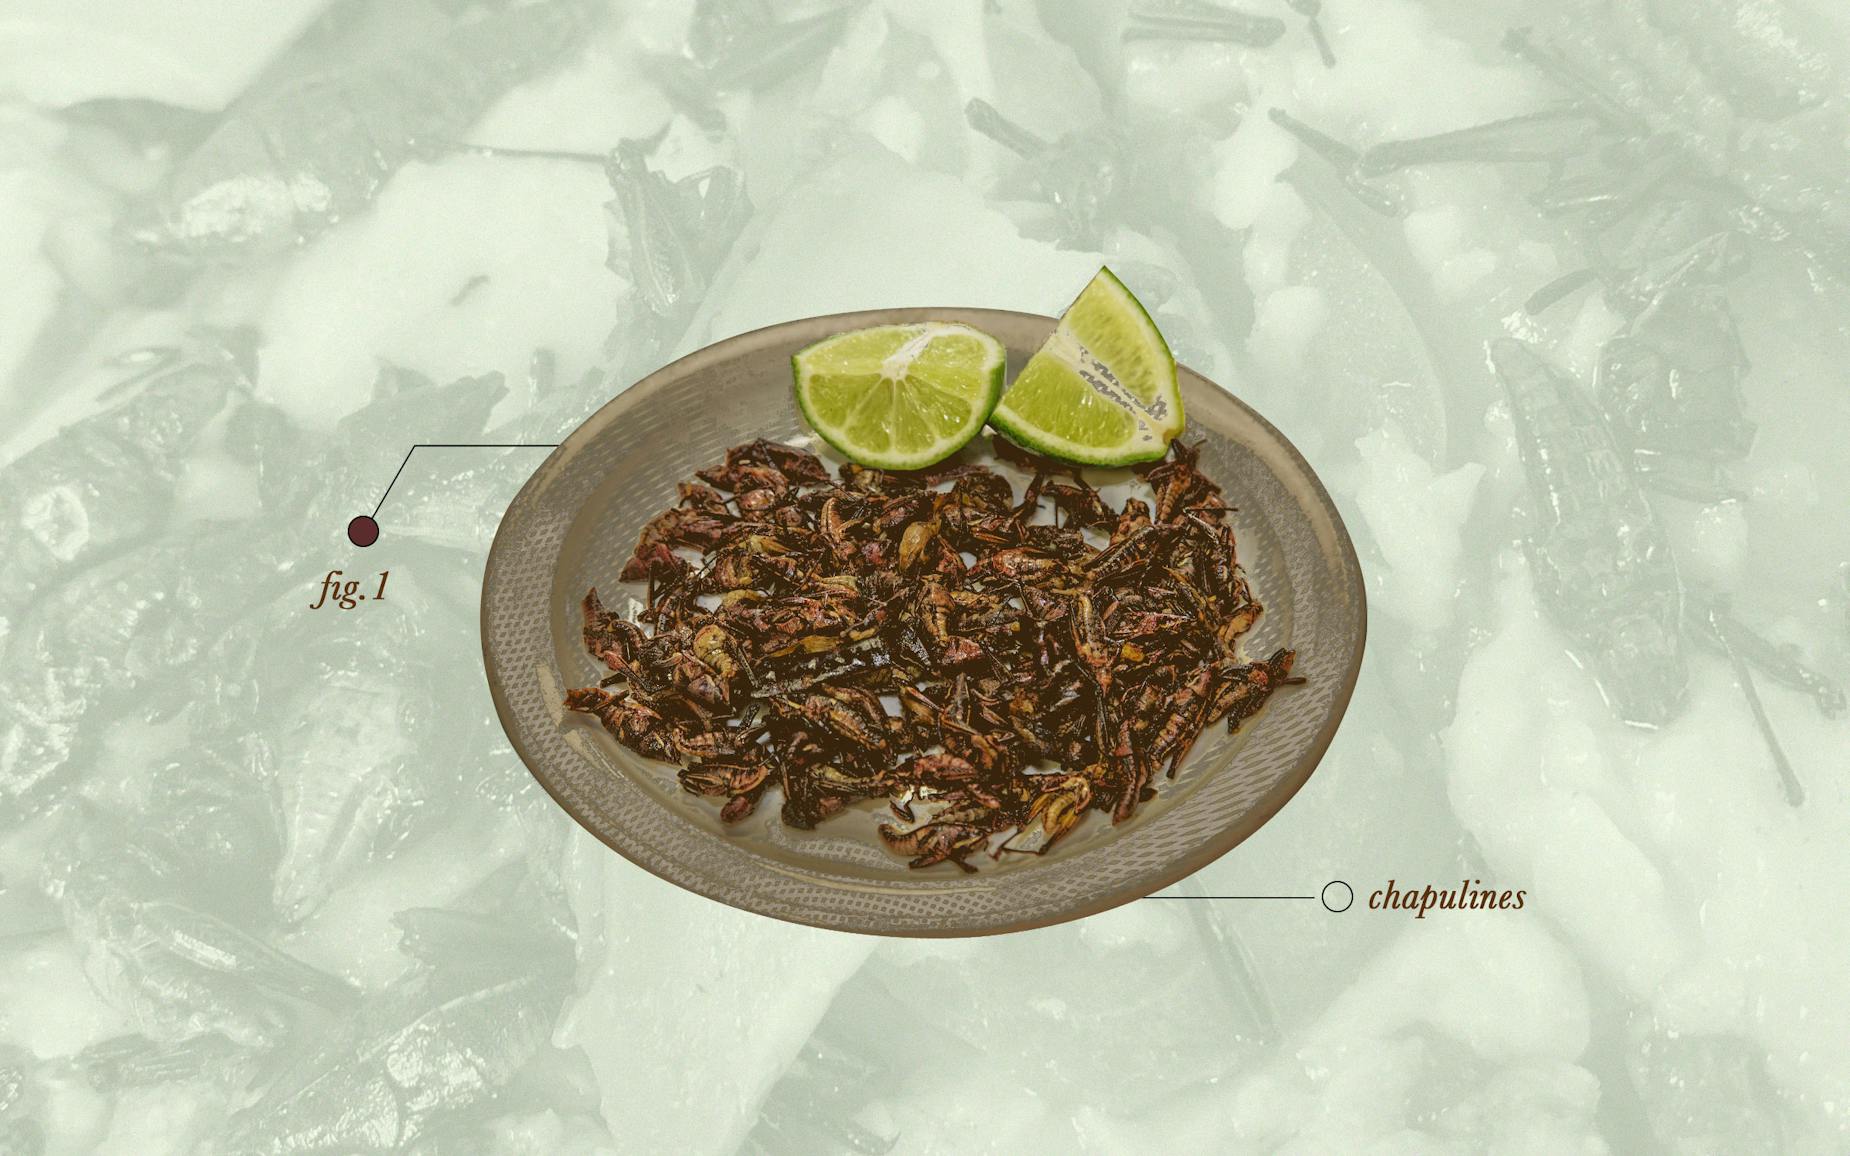 Live a Little and Try Crunching on Chapulines, or Roasted Grasshoppers